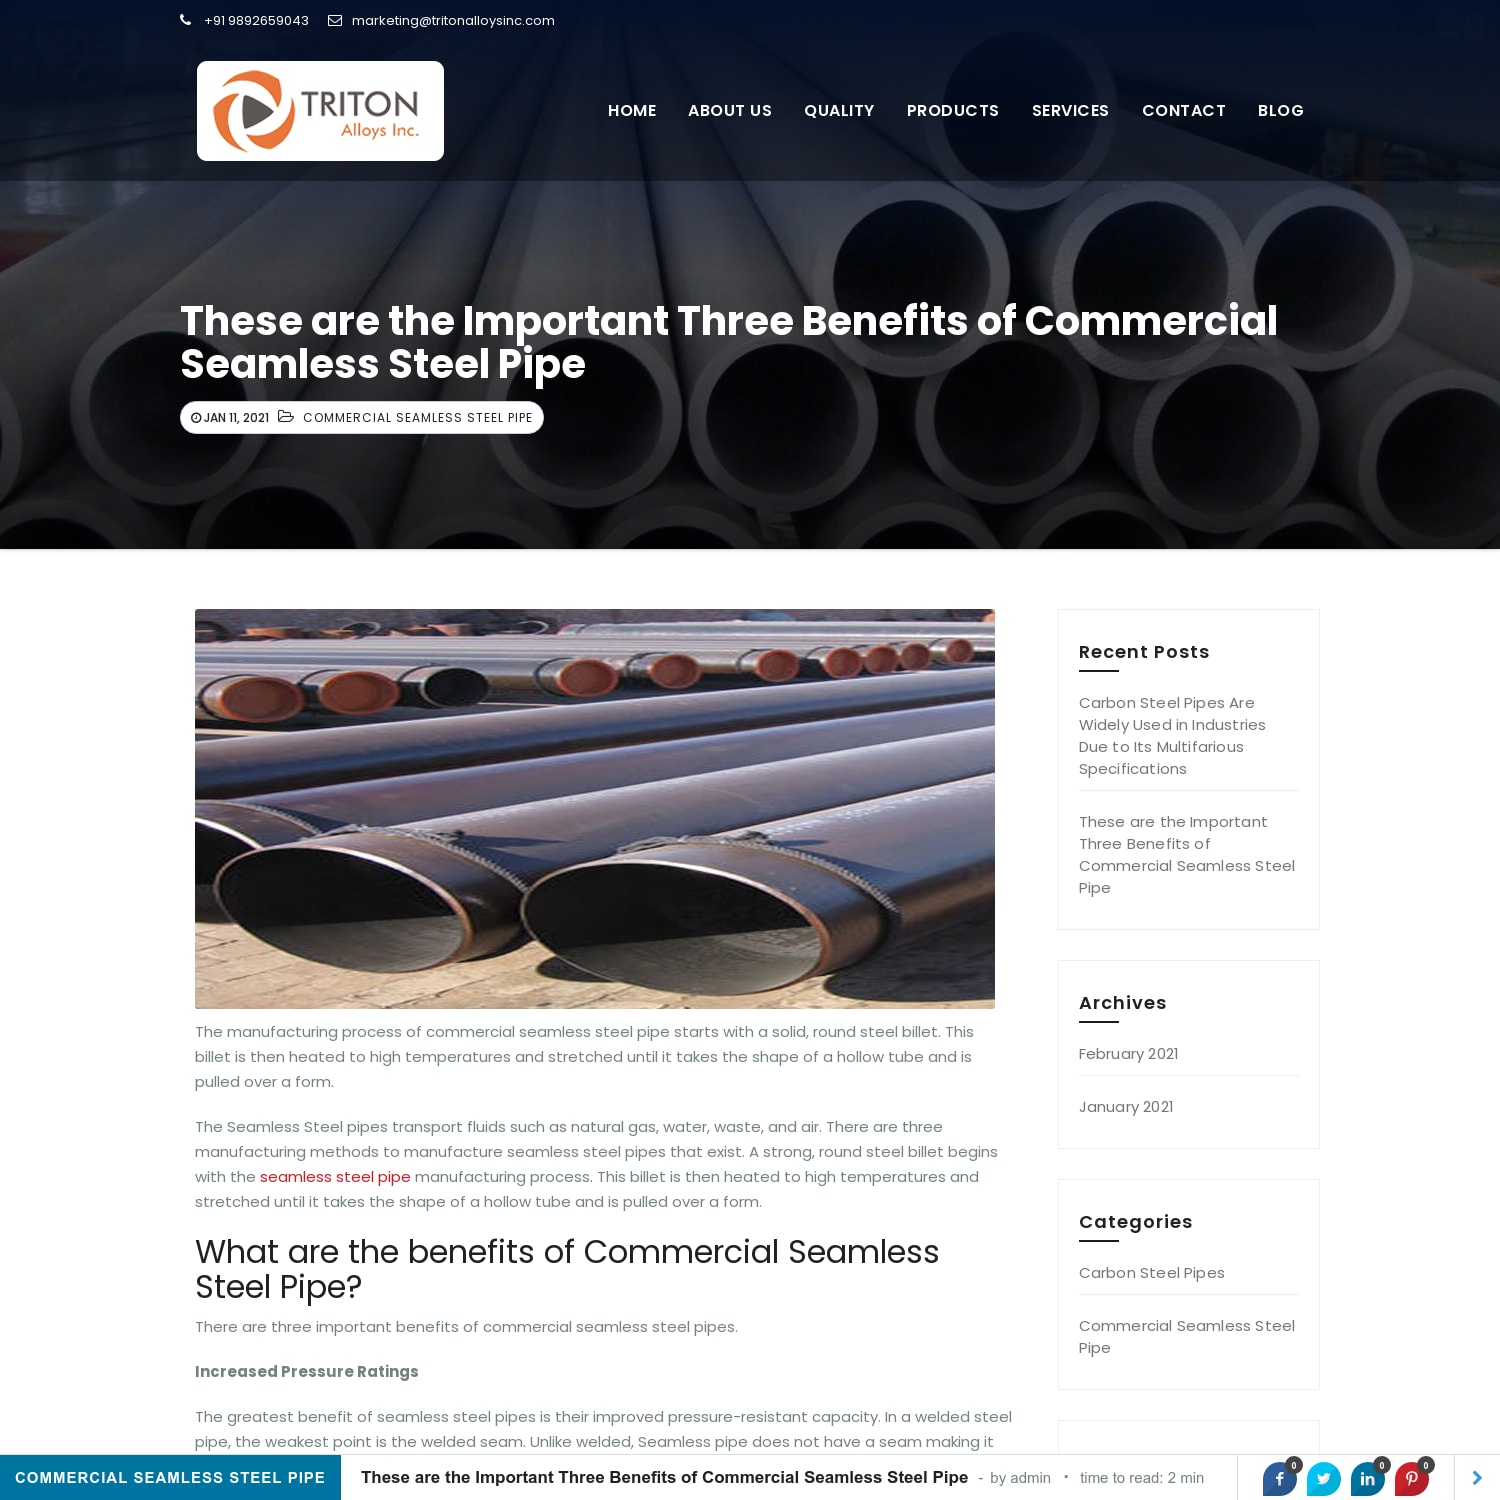 These are the Important Three Benefits of Commercial Seamless Steel Pipe